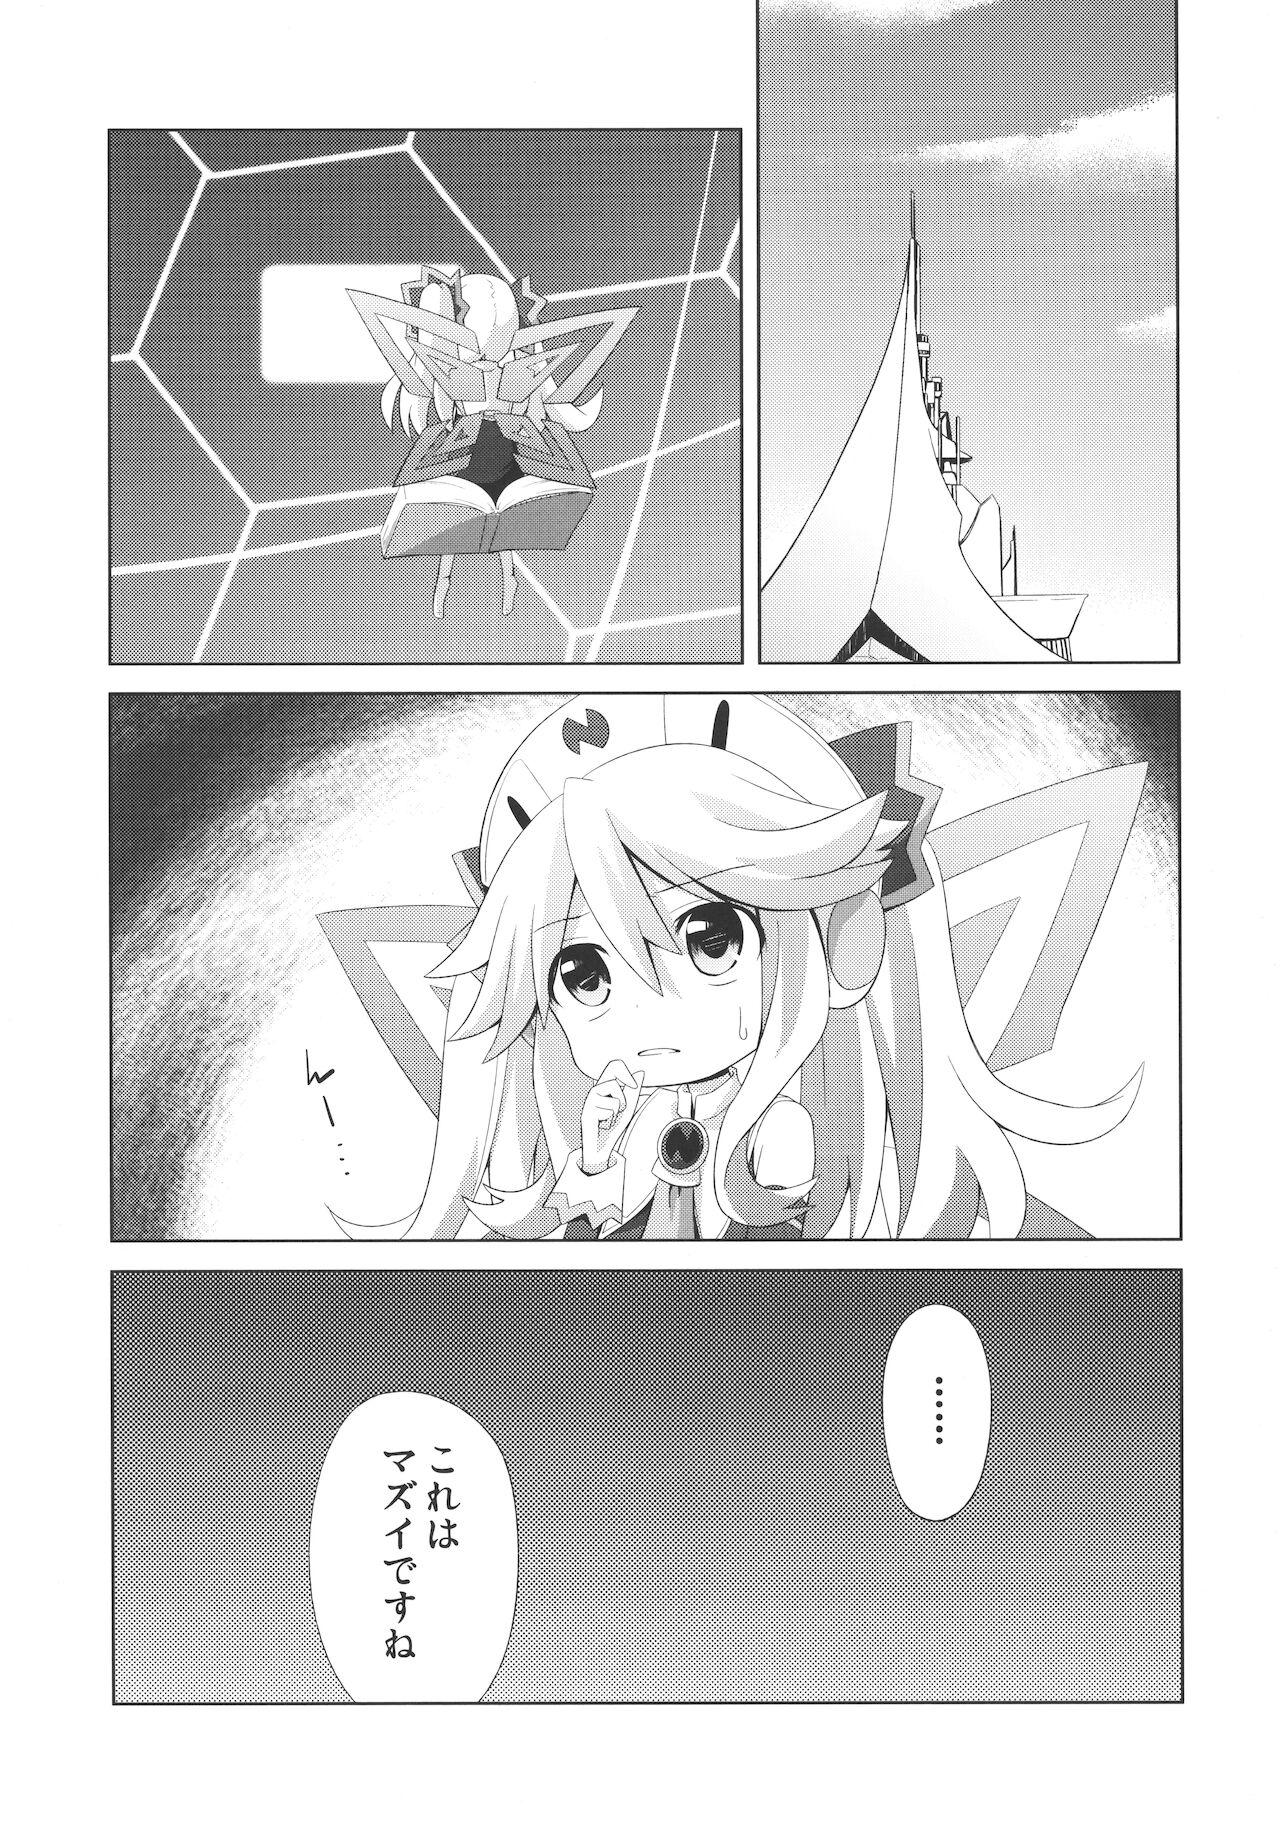 A certain Nepgear was harmed in the making of this doujinshi 4